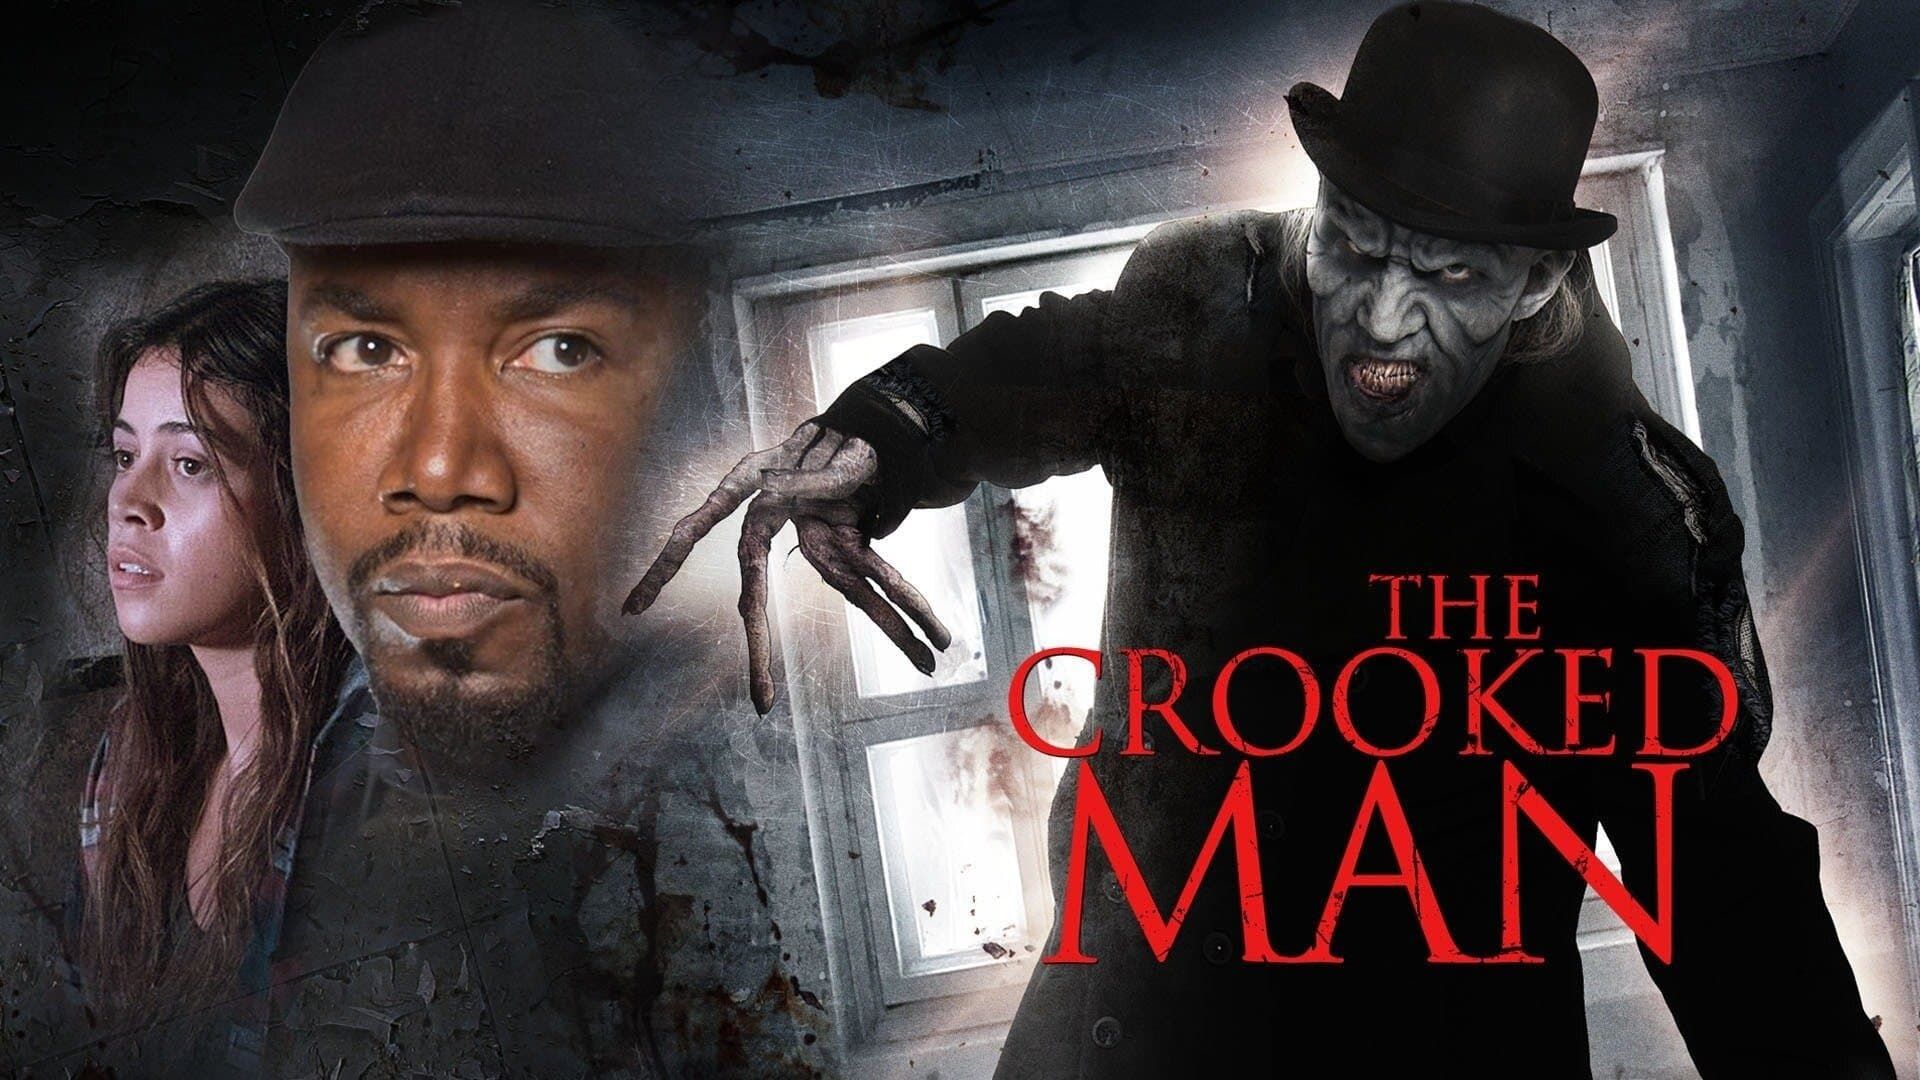 The Crooked Man background